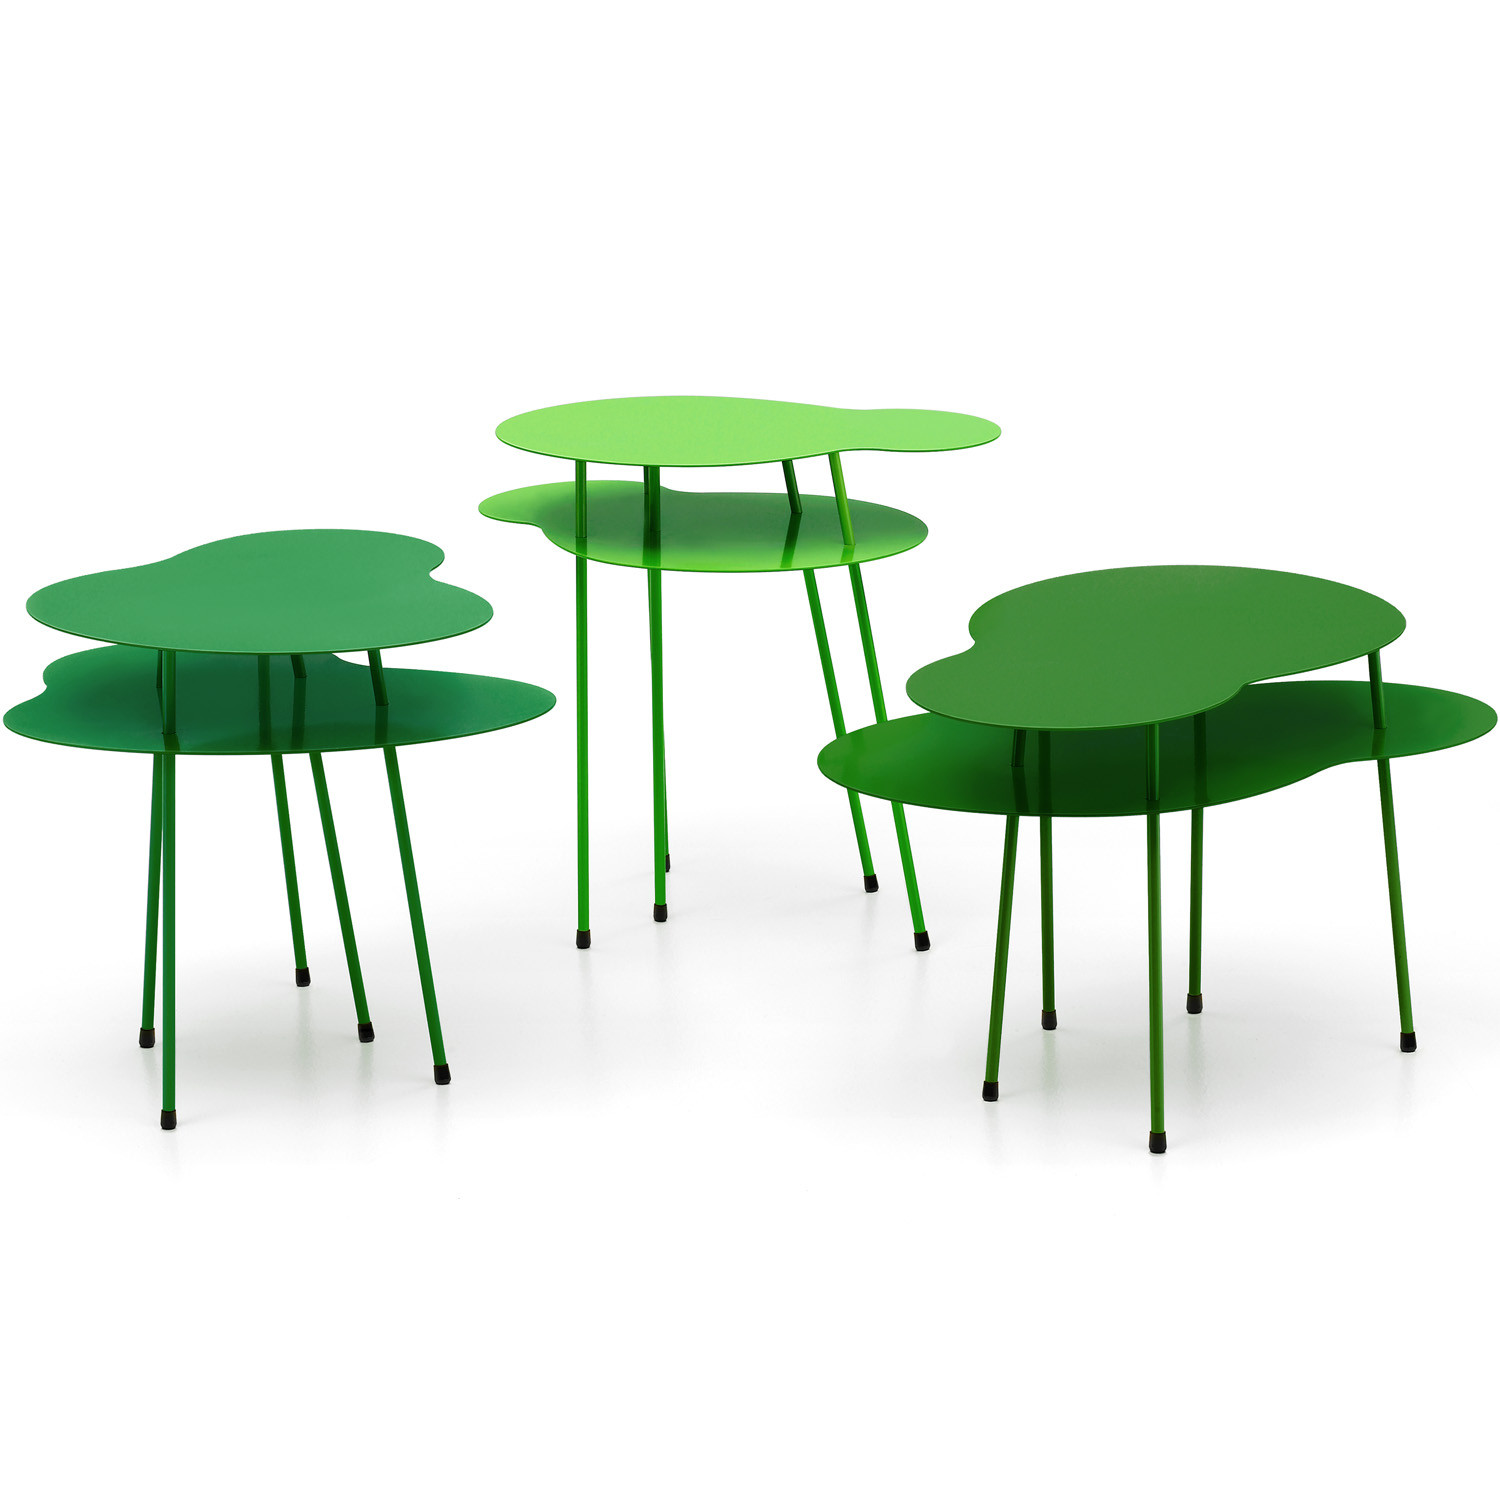 Amazonas Tables by Offecct